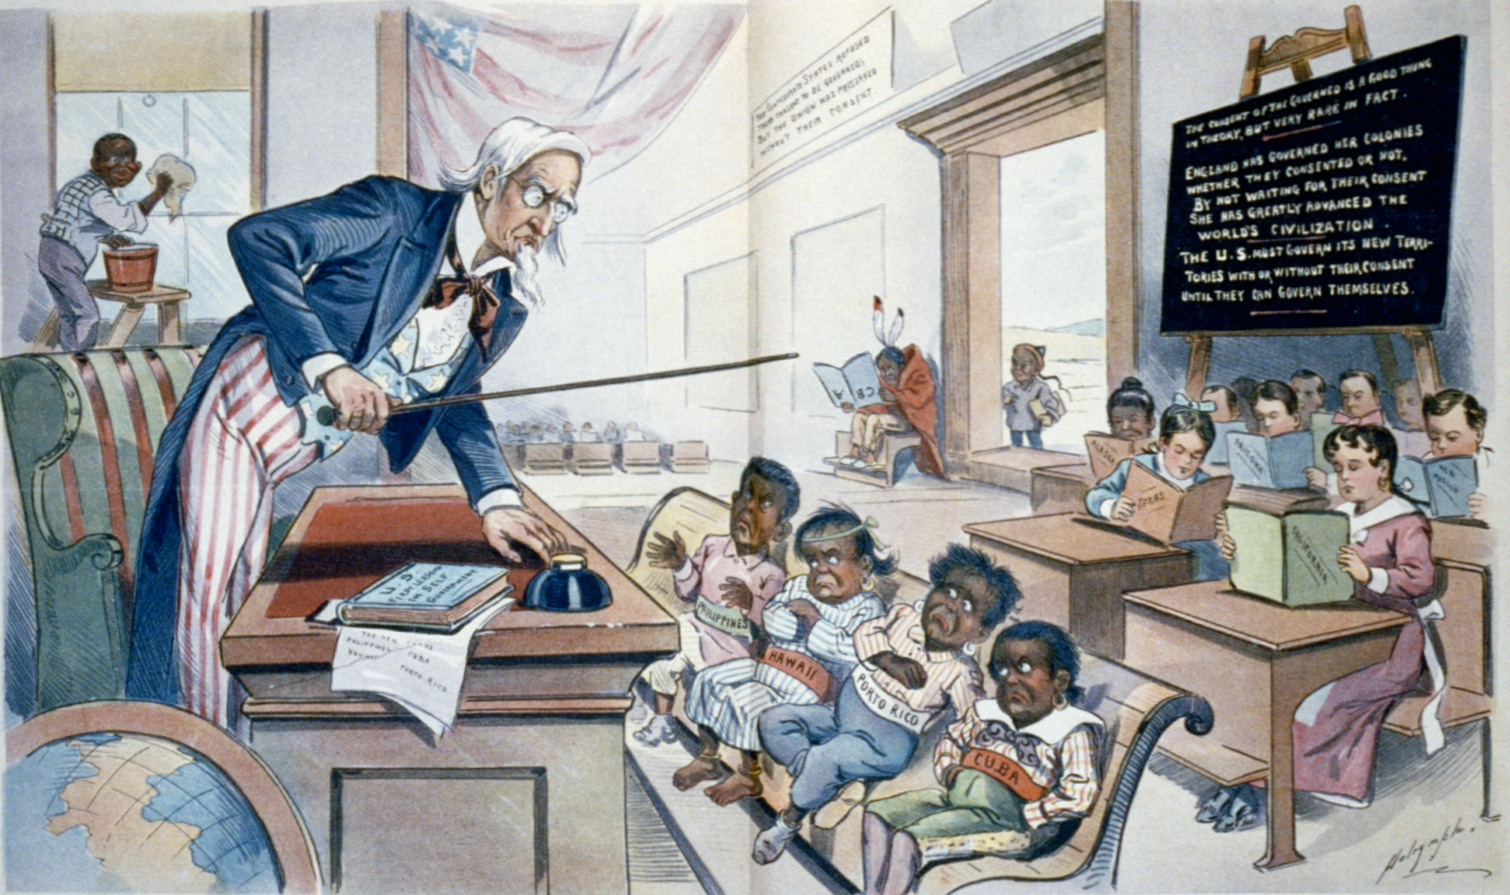 Caricature of American expansionism and racism showing Uncle Sam lecturing four children labelled Philippines, Hawaii, Puerto Rico and Cuba in front of children holding books labelled with various U.S. states. In the background are a Native American child holding a book upside down, a Chinese boy at the door, and an African American boy cleaning a window.